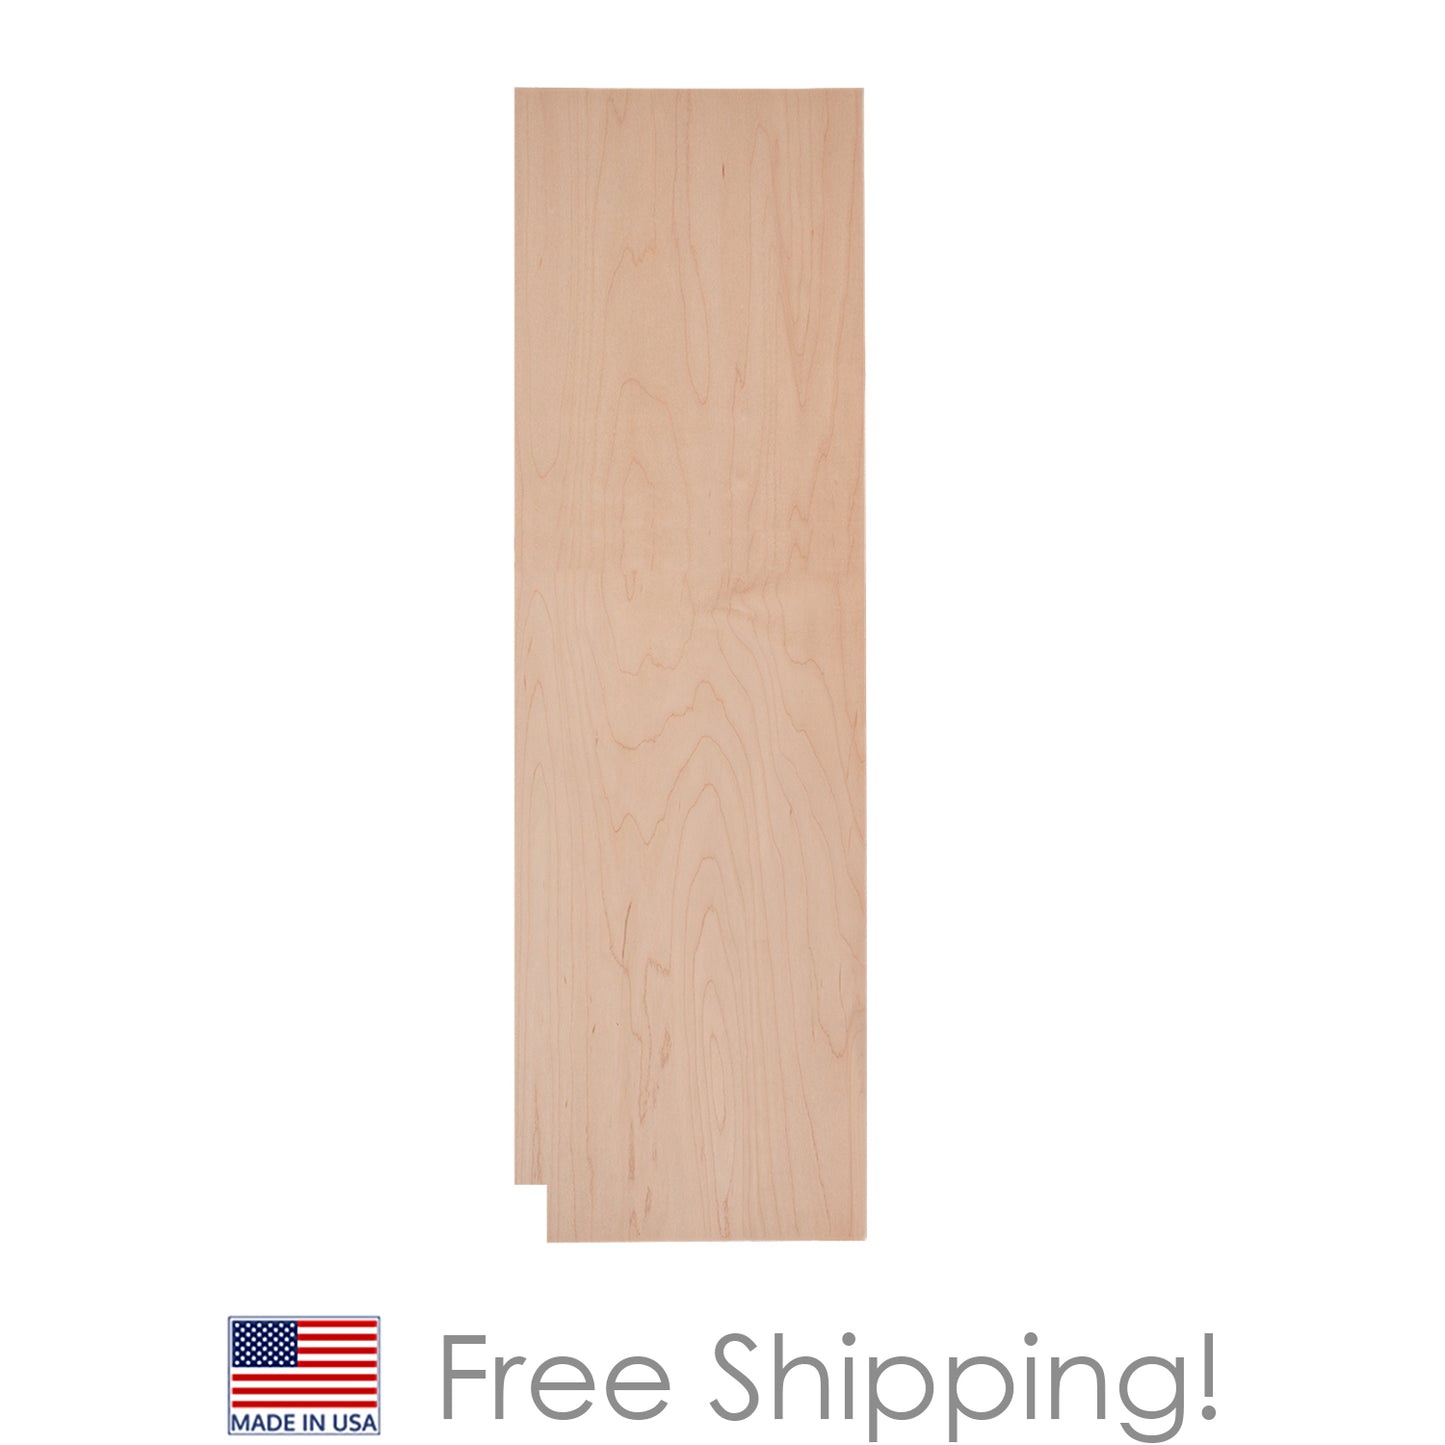 Quicklock RTA (Ready-to-Assemble) Raw Maple .25"X23.25"X84" Pantry End Panel - Right Side